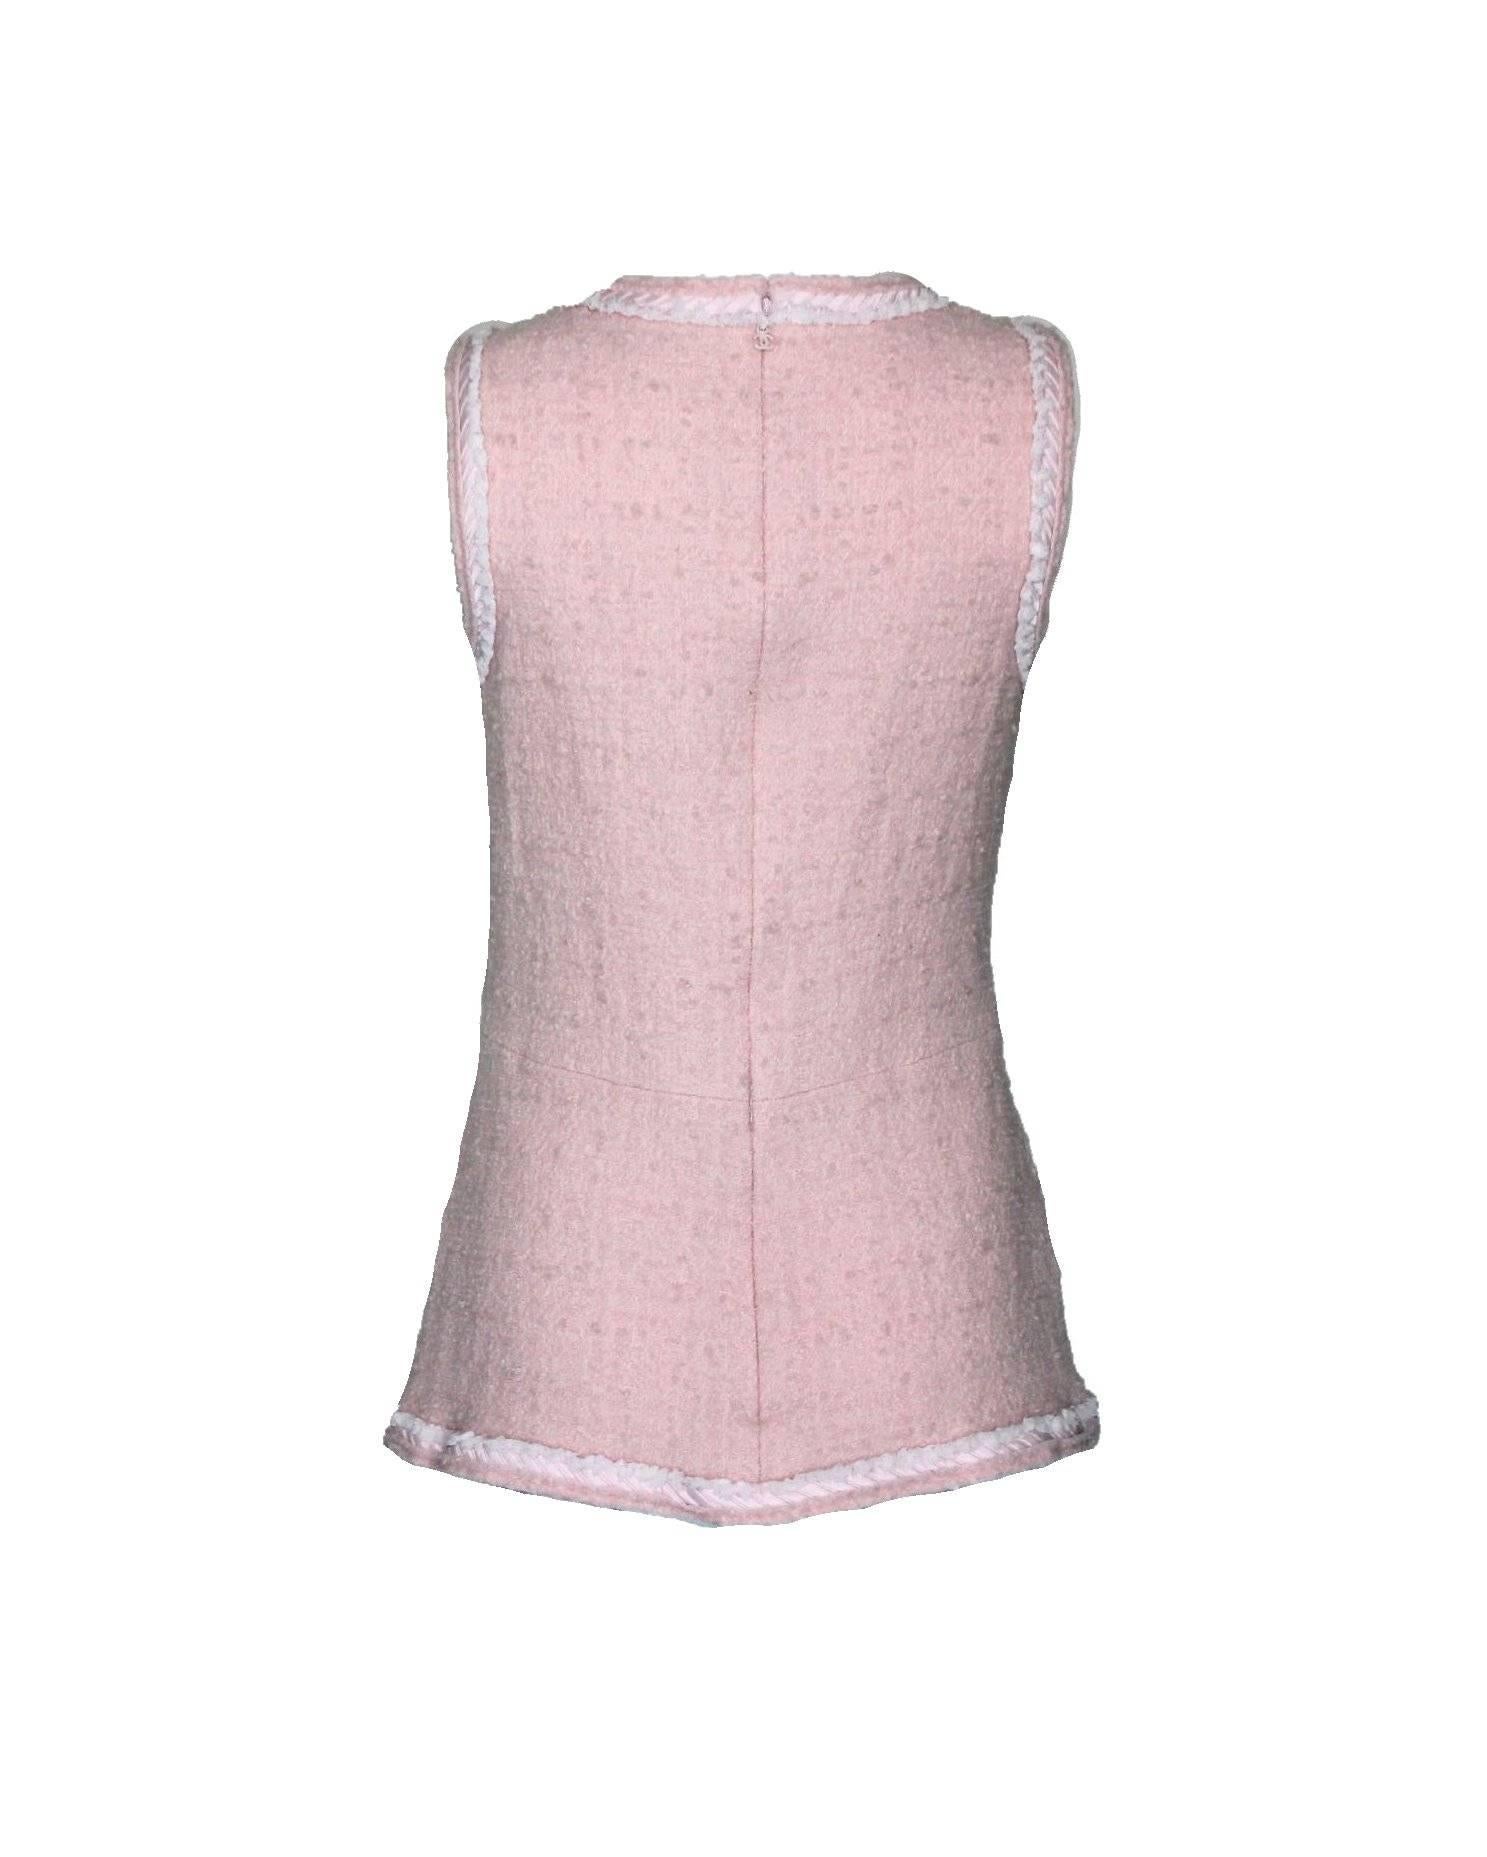 Chanel signature fantasy tweed top
The tweed fabric is exclusively produced by Maison Lesage
Designed by Karl Lagerfeld 
Beautiful trimming with fringe details
Pale pink color
Two front pockets
Fully lined with CC logo silk
Opens with long zip in